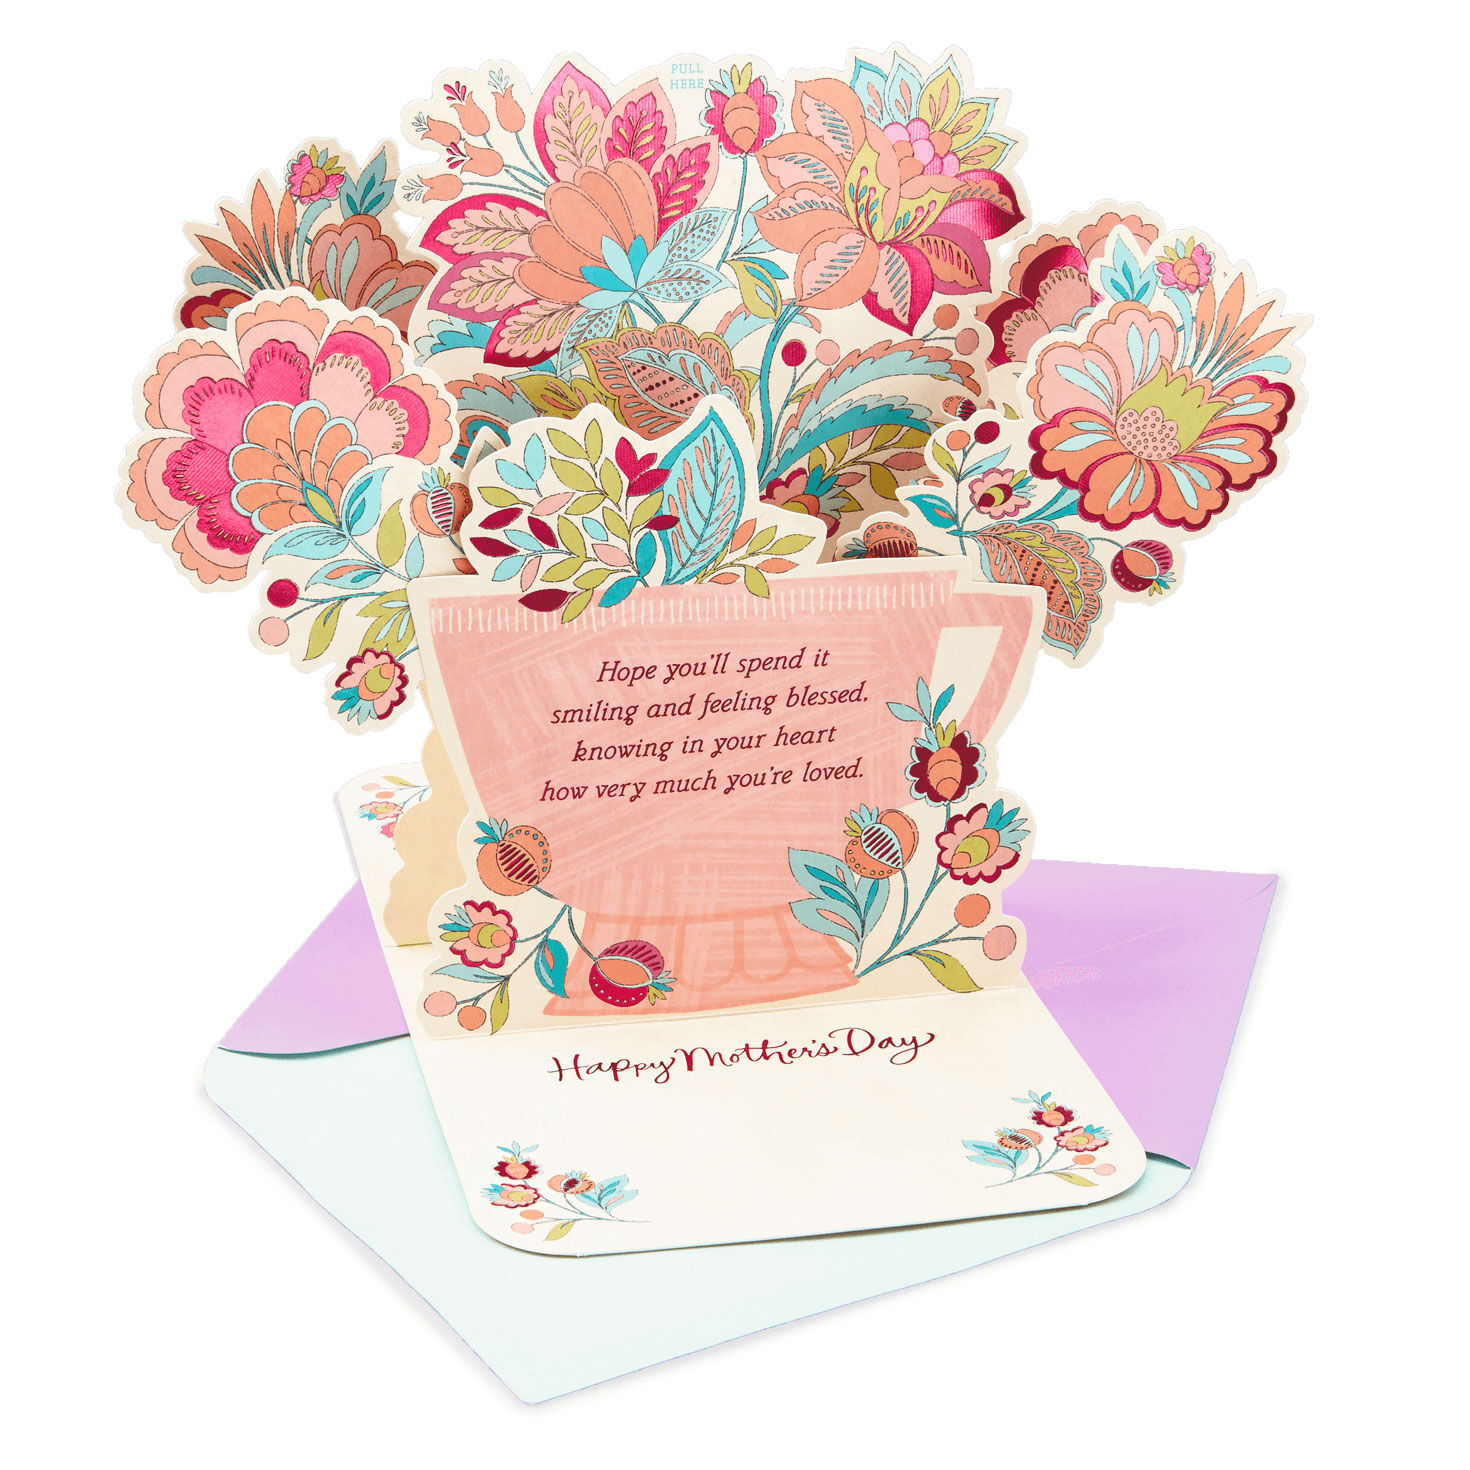 Tea Cup with Floating Pink Rose Petal Surround By Pink Roses Mother's Day  Card for Mom